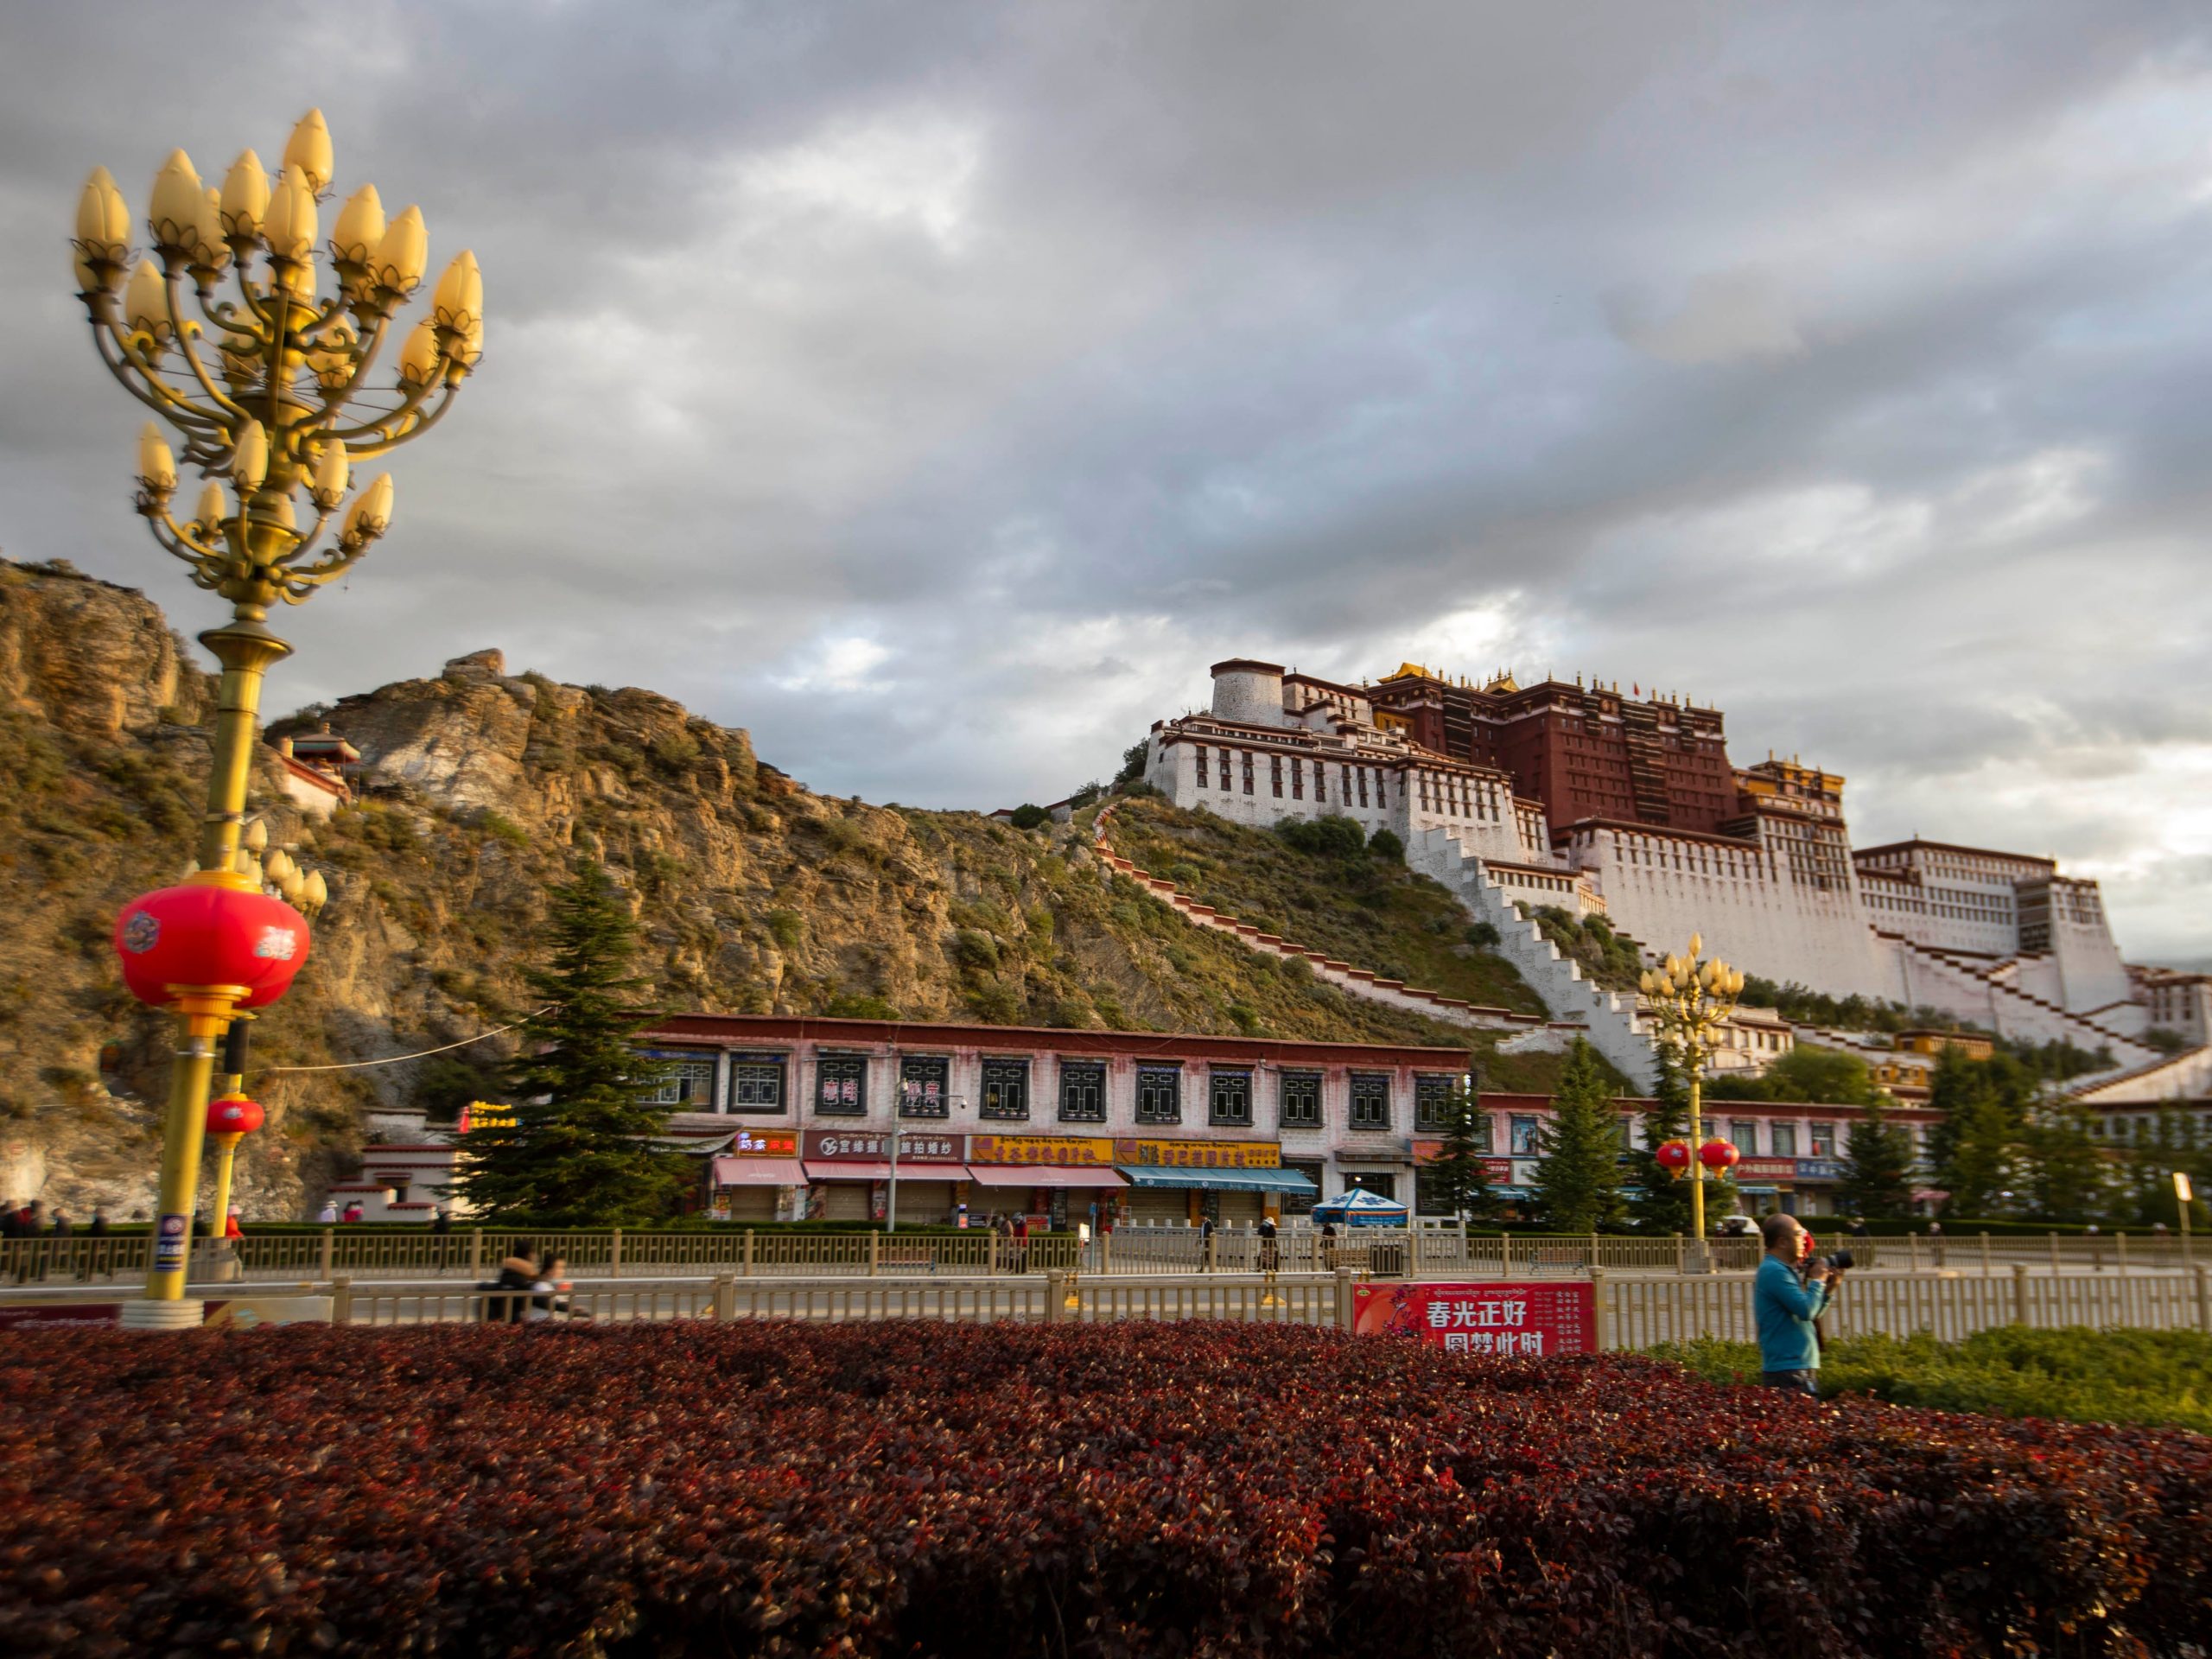 LHASA, CHINA - SEPTEMBER 19, 2020 - Visitors take photos of the White Tower in potala Palace Square. Lhasa, Tibet, China, September 19, 2020.- PHOTOGRAPH BY Costfoto / Barcroft Studios / Future Publishing (Photo credit should read Costfoto/Barcroft Media via Getty Images)